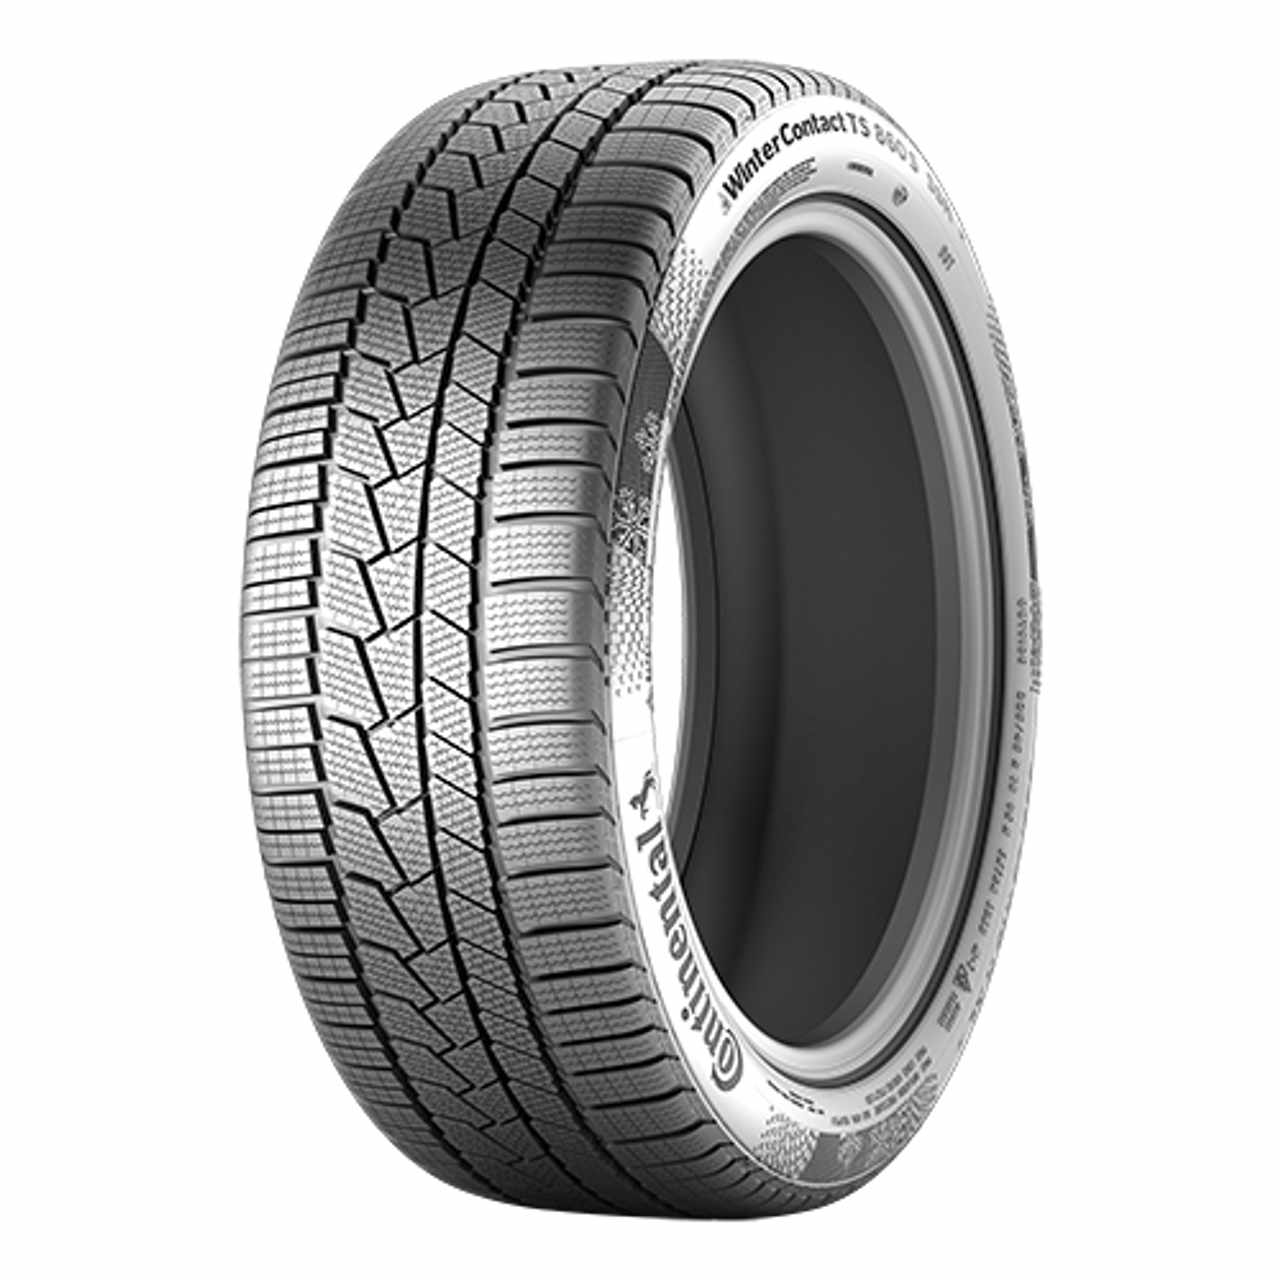 CONTINENTAL WINTERCONTACT TS 860 S (*) (MO) (EVc) 275/35R20 102V BSW von Continental